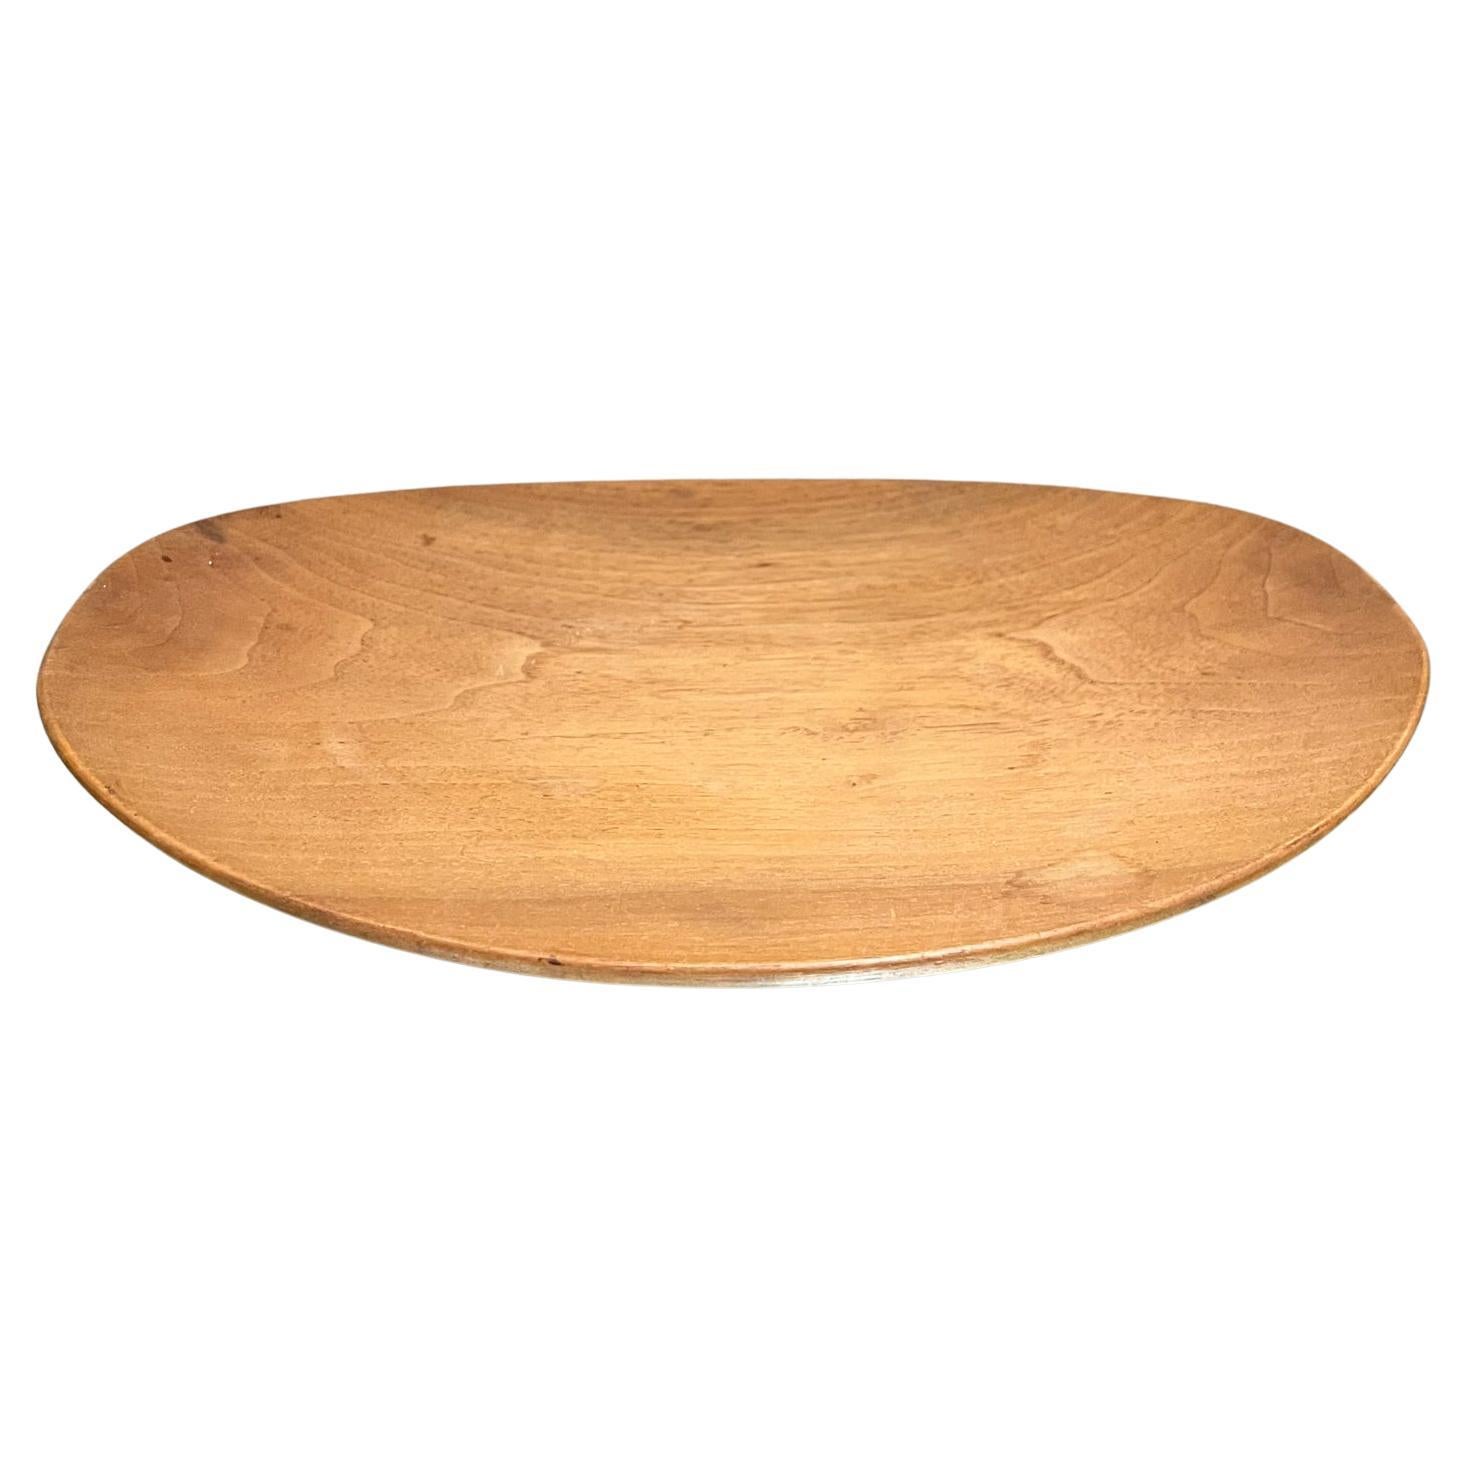 1960s Sculptural Oval Platter Solid Wood Plate Serving Tray For Sale